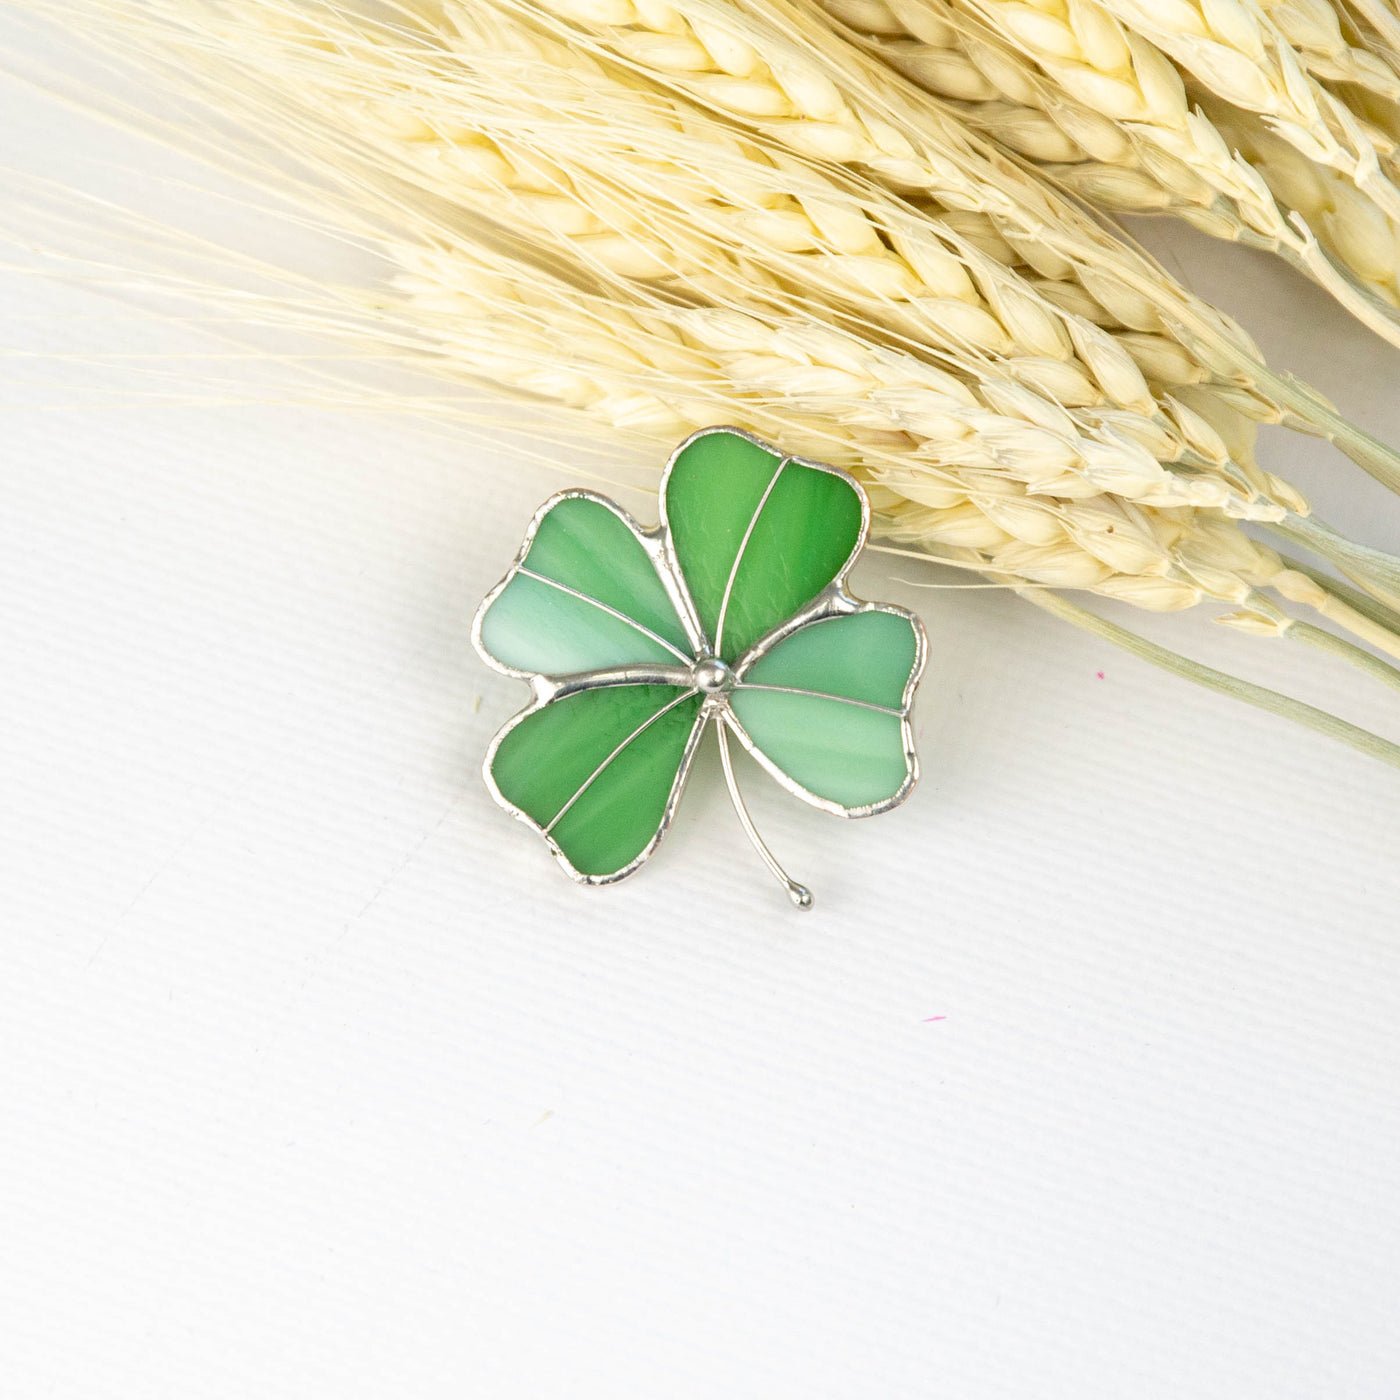 Zoomed 4-leaf clover pin of stained glass